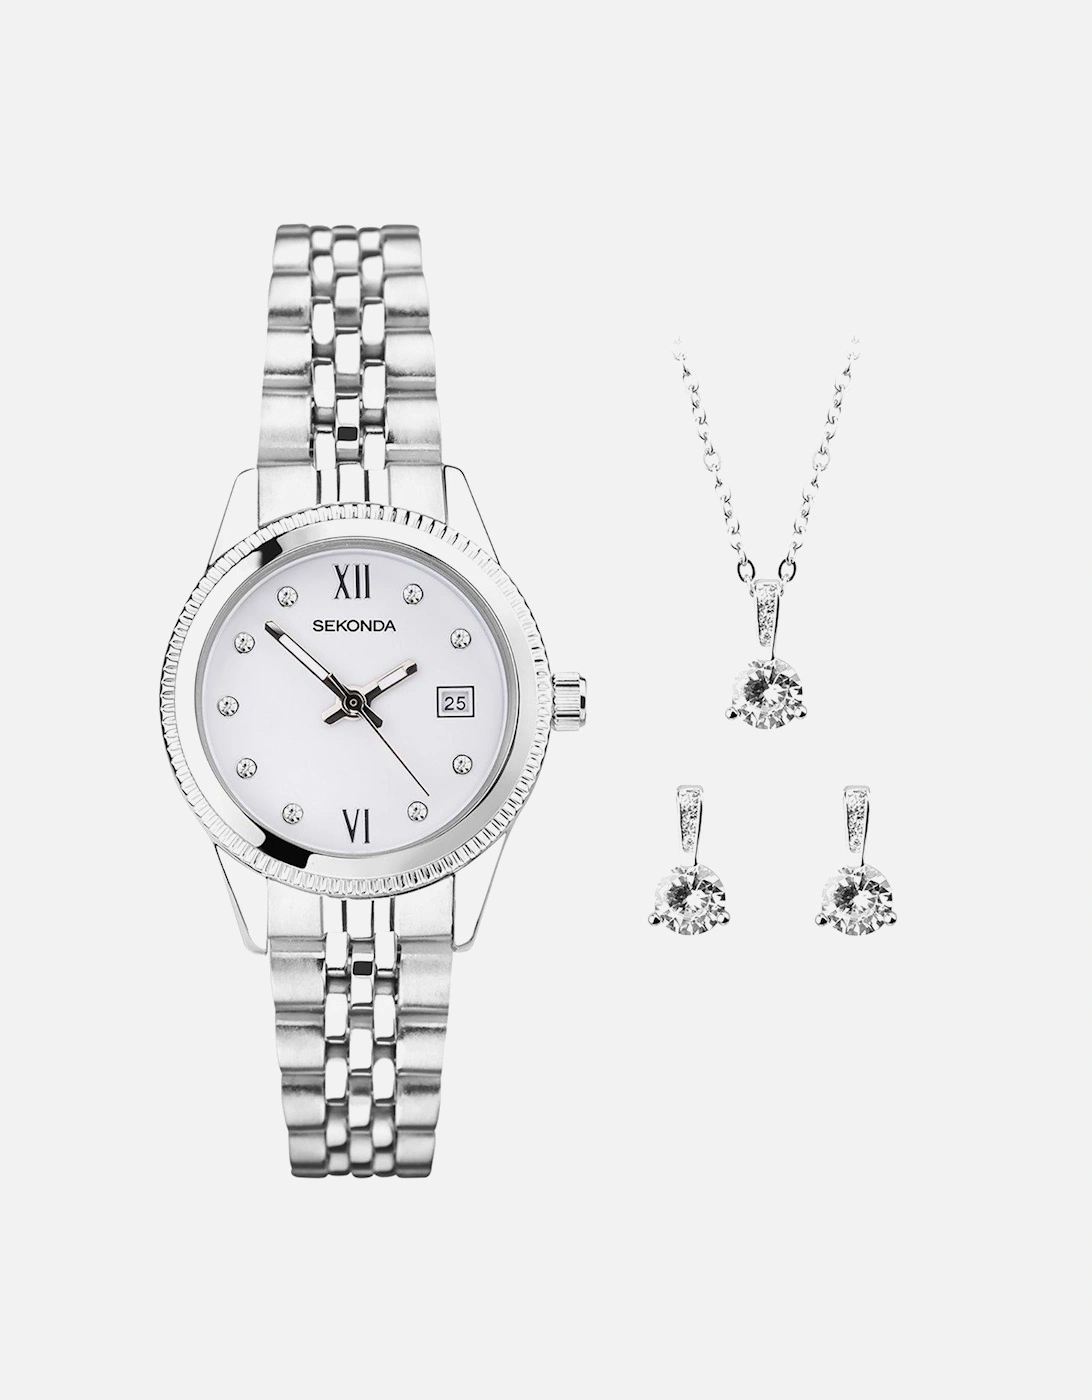 Gift Set Womens 26mm Analogue Watch with Silver Stone Set White Dial, Silver Stainless Steel Bracelet Matching Stone Set Pendant and Earrings, 2 of 1